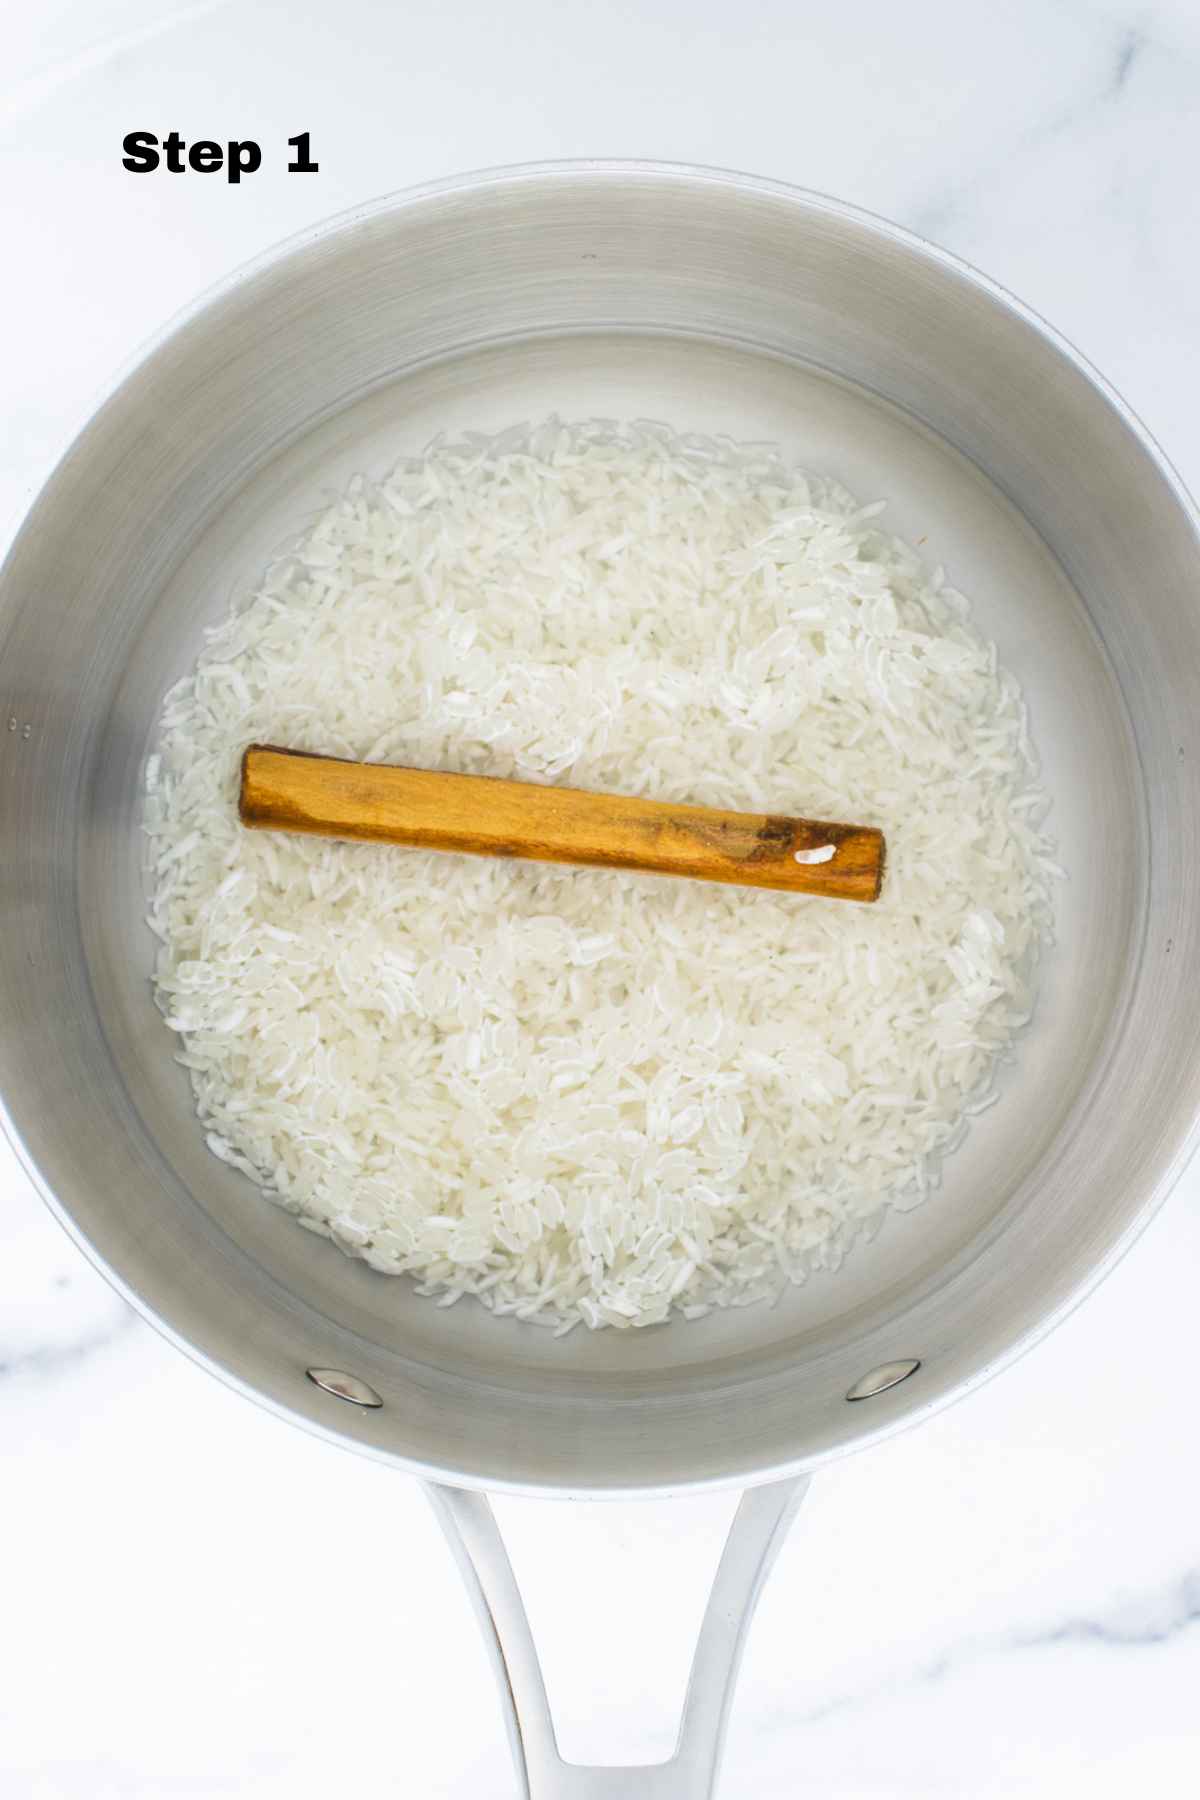 Jasmine rice in a saucepan with water and cinnamon stick.